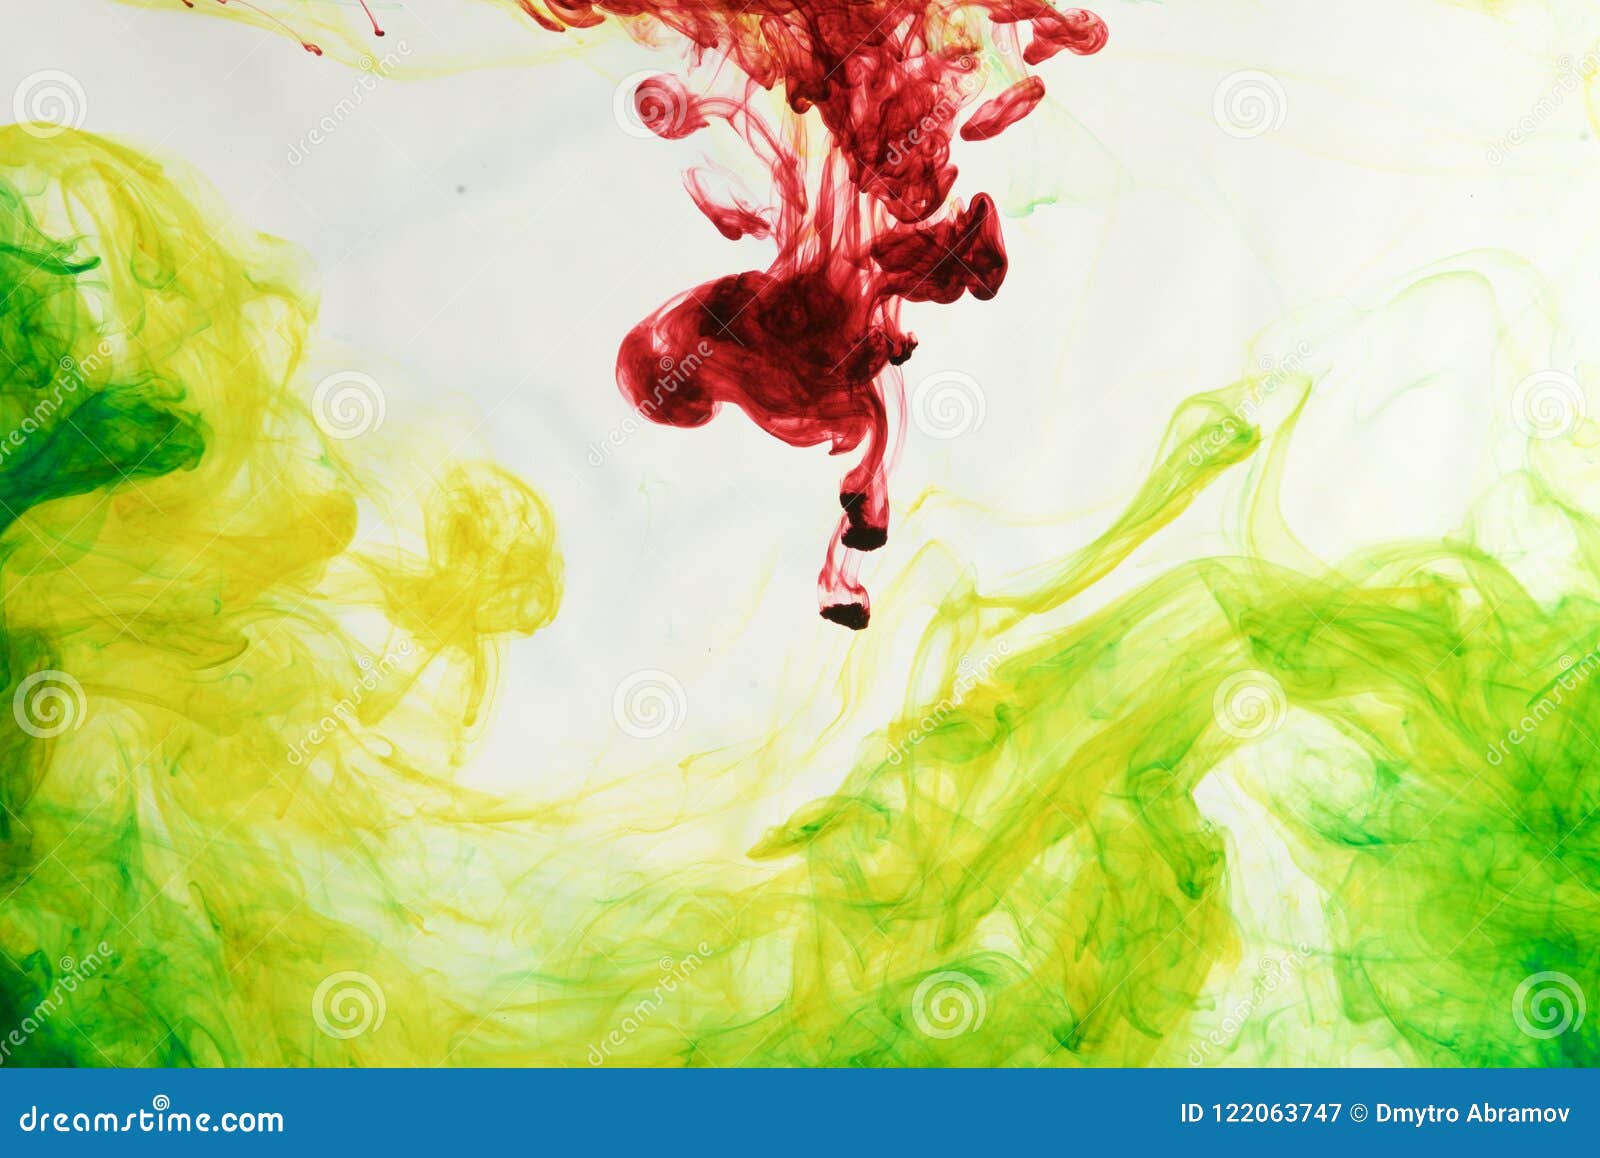 Inks in Water, Color Abstraction, Color Explosion Stock Image - Image ...